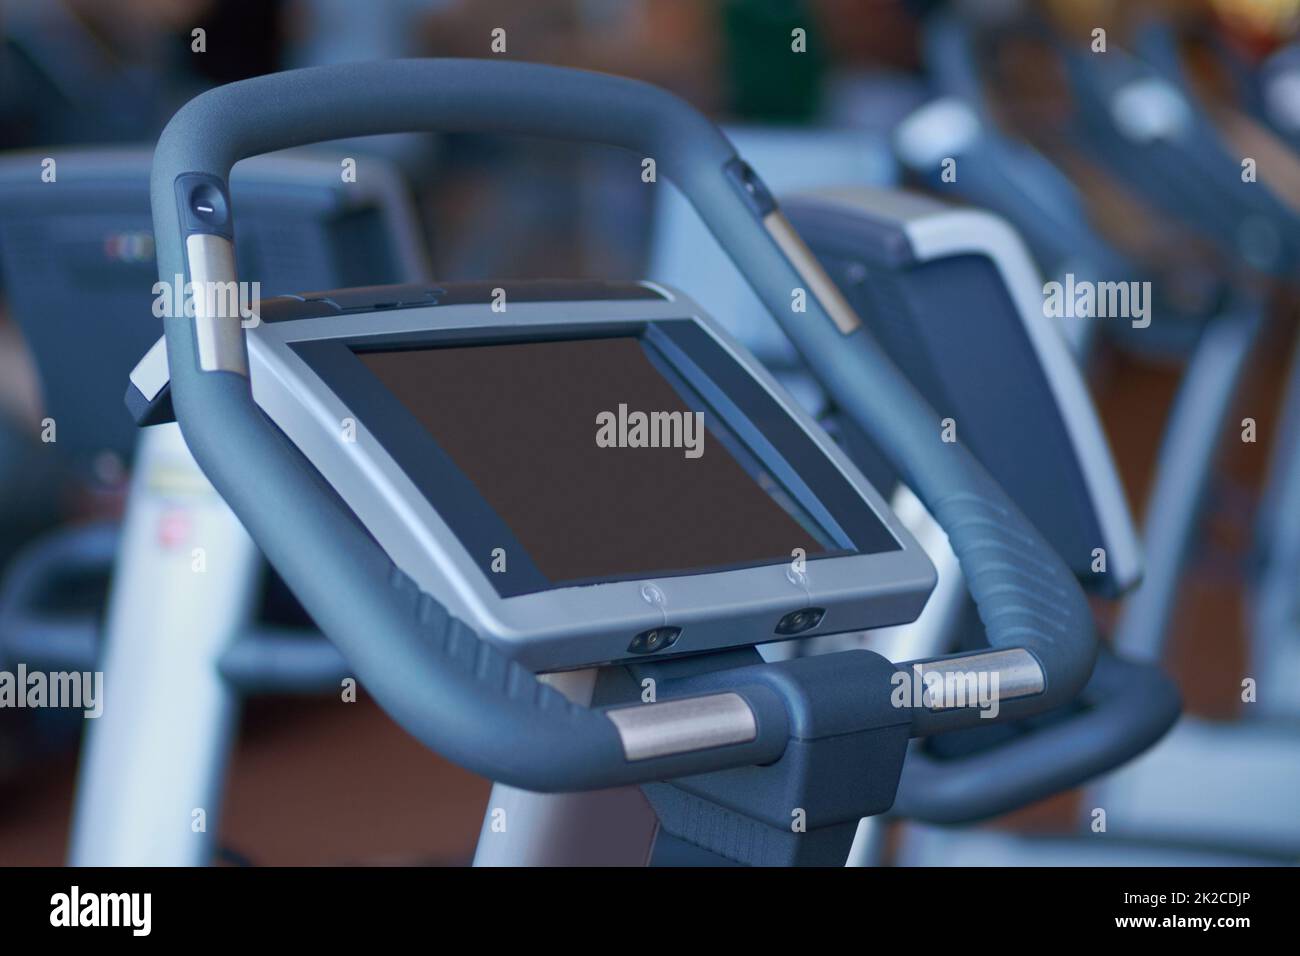 Recording your heart rate. Shot of a cardio equipment at a gym. Stock Photo